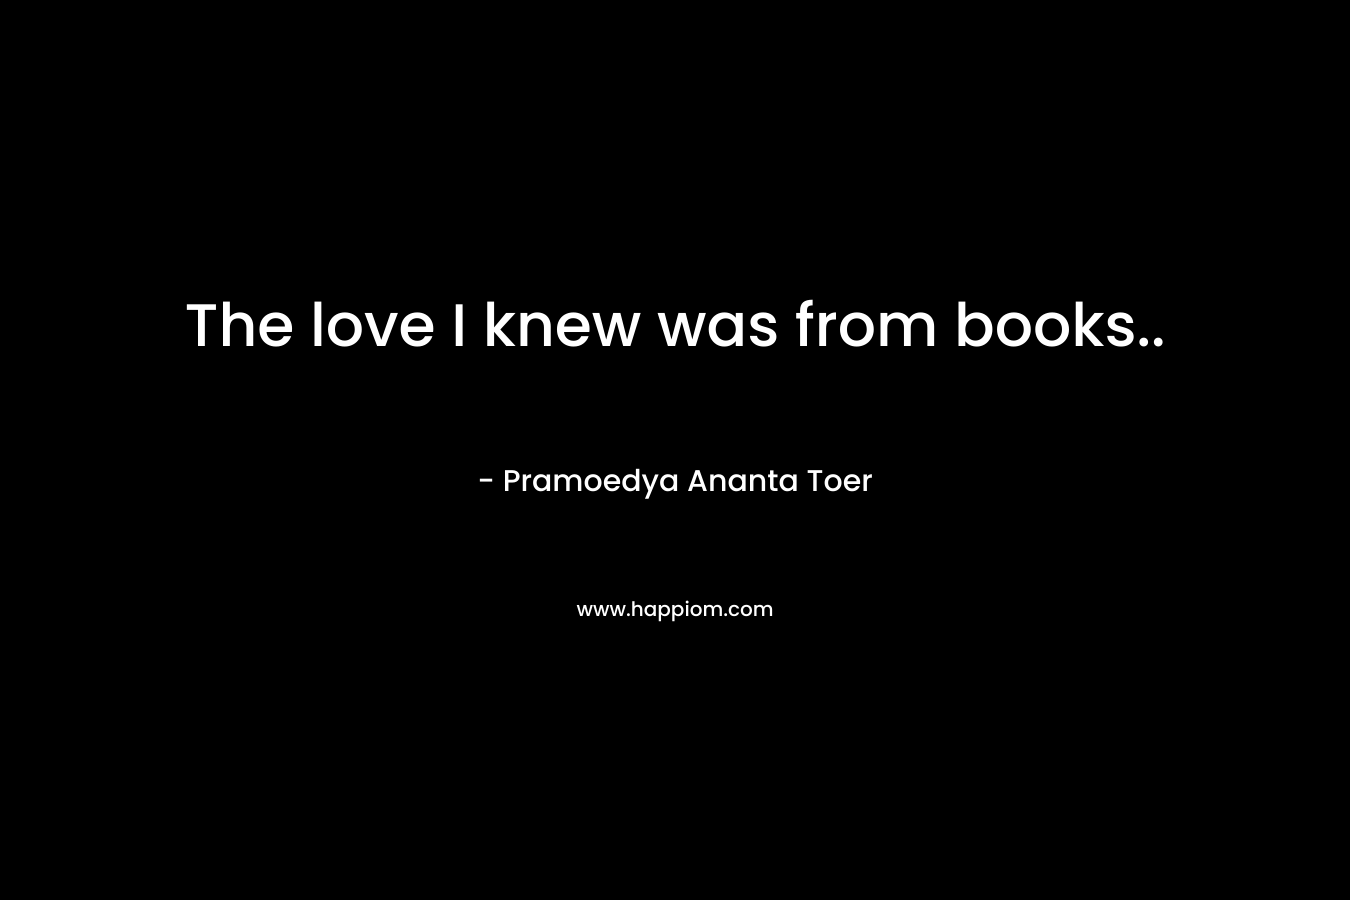 The love I knew was from books..